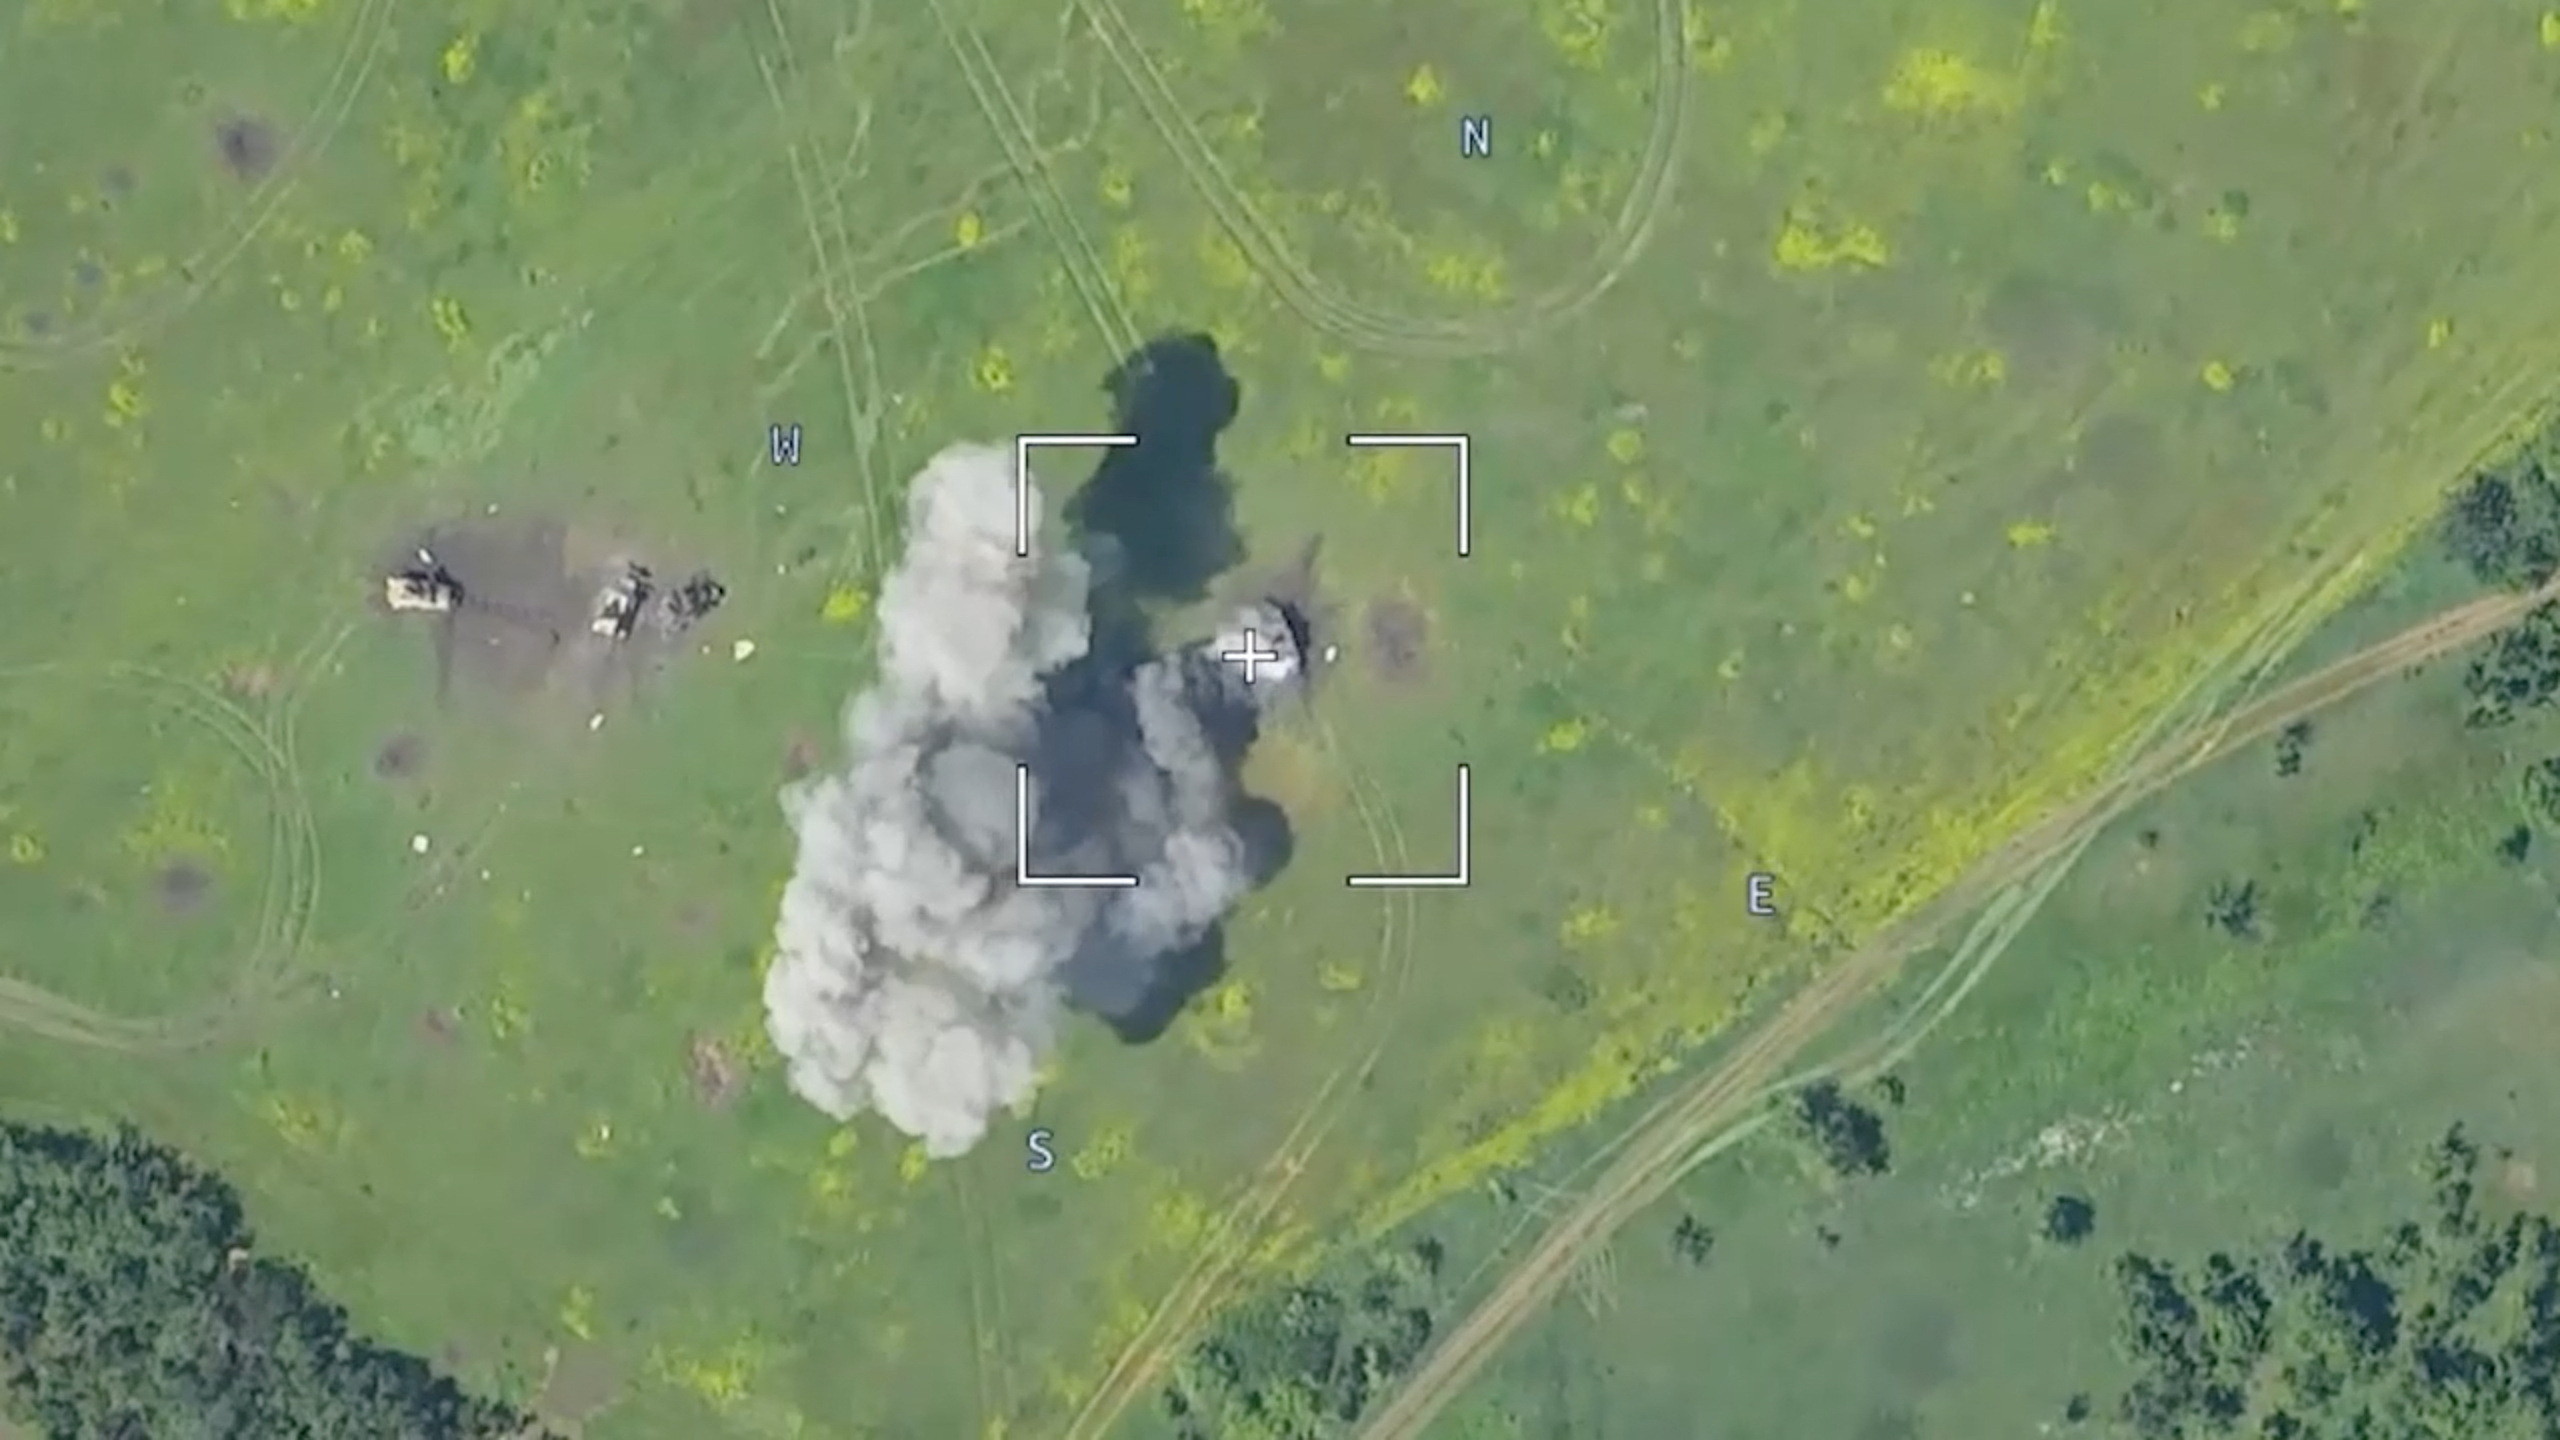 Drone footage shows a burning armoured vehicle in an unidentified location after the Defence Ministry in Moscow said that Russian forces have thwarted a major Ukrainian offensive in the southern Ukrainian region of Donetsk./Reuters via third party.